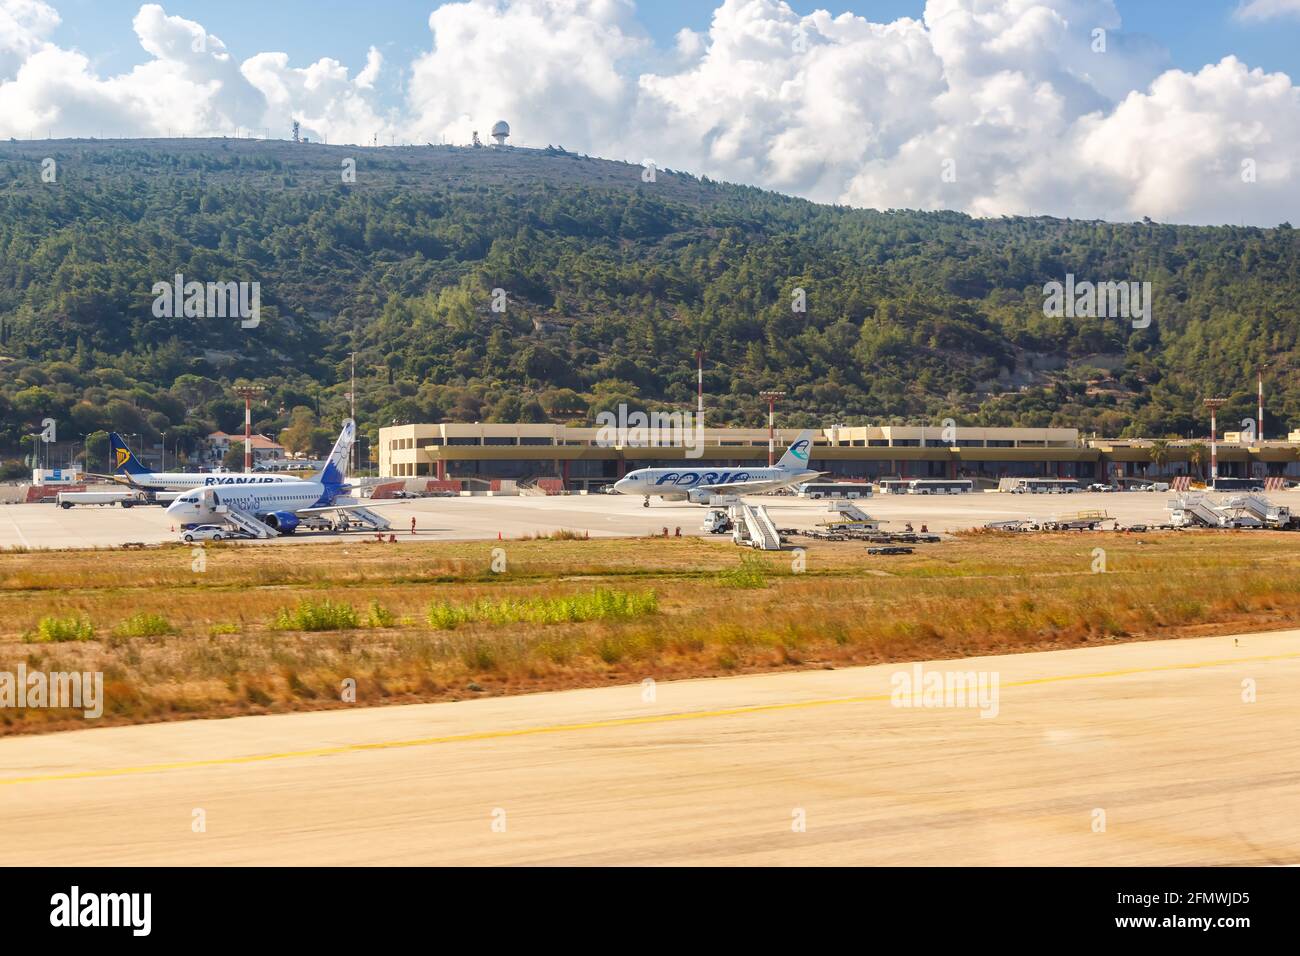 Rhodes, Greece - September 14, 2018: Airplanes at Rhodes Airport (RHO) in Greece. Stock Photo